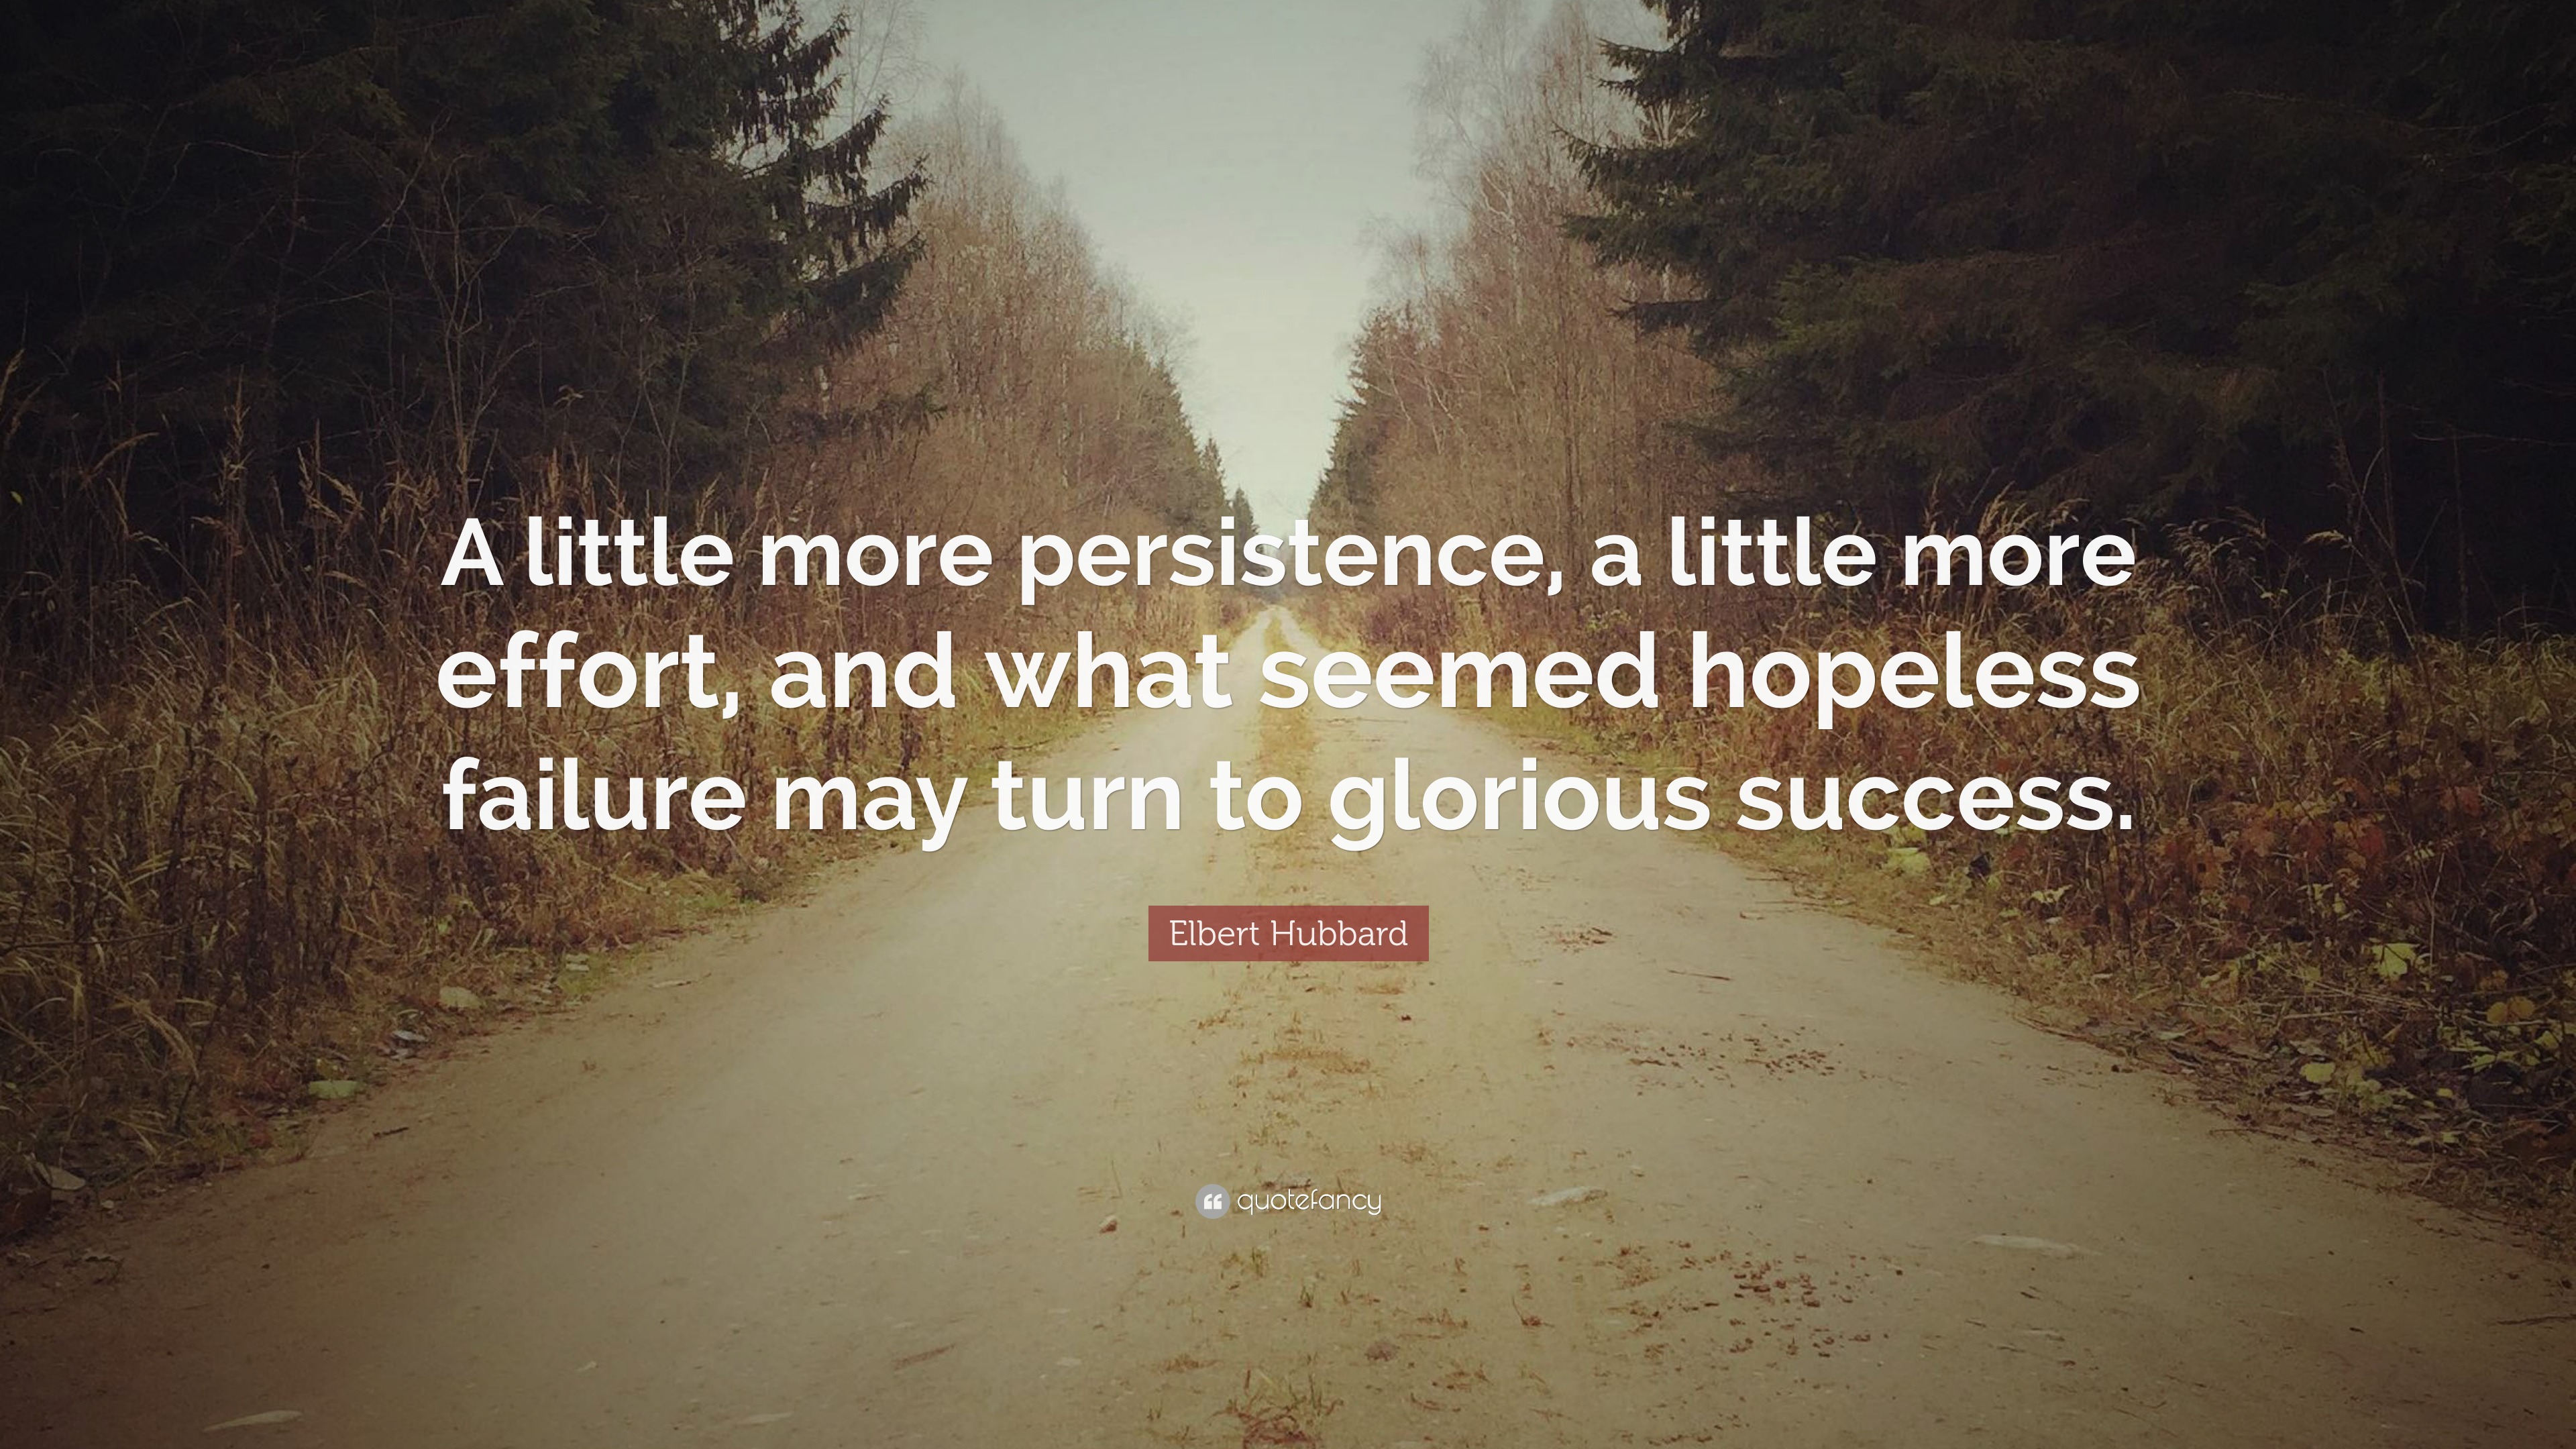 Elbert Hubbard Quote: “A little more persistence, a little more effort